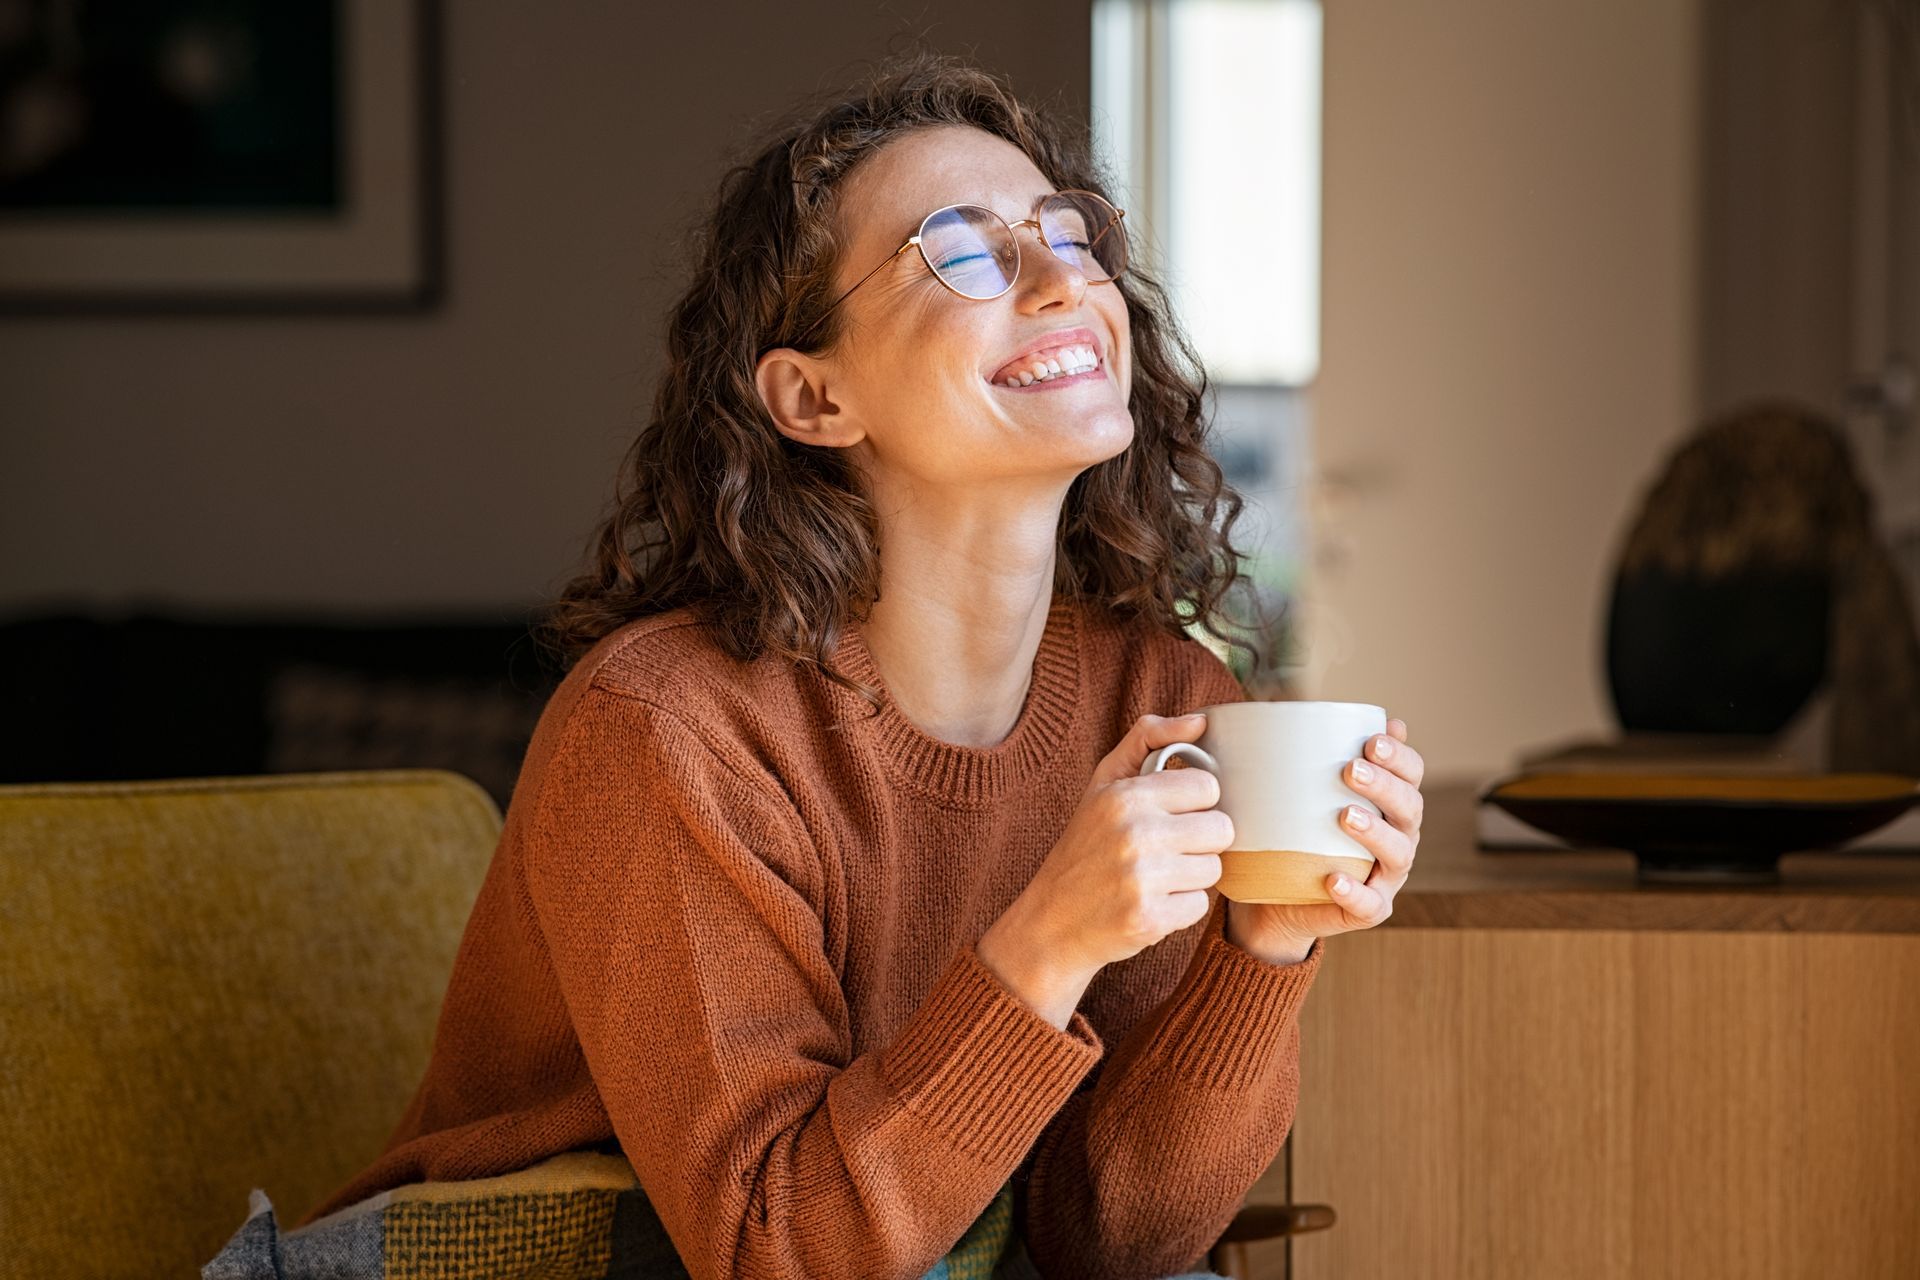 A woman smiling holding a cup of coffee